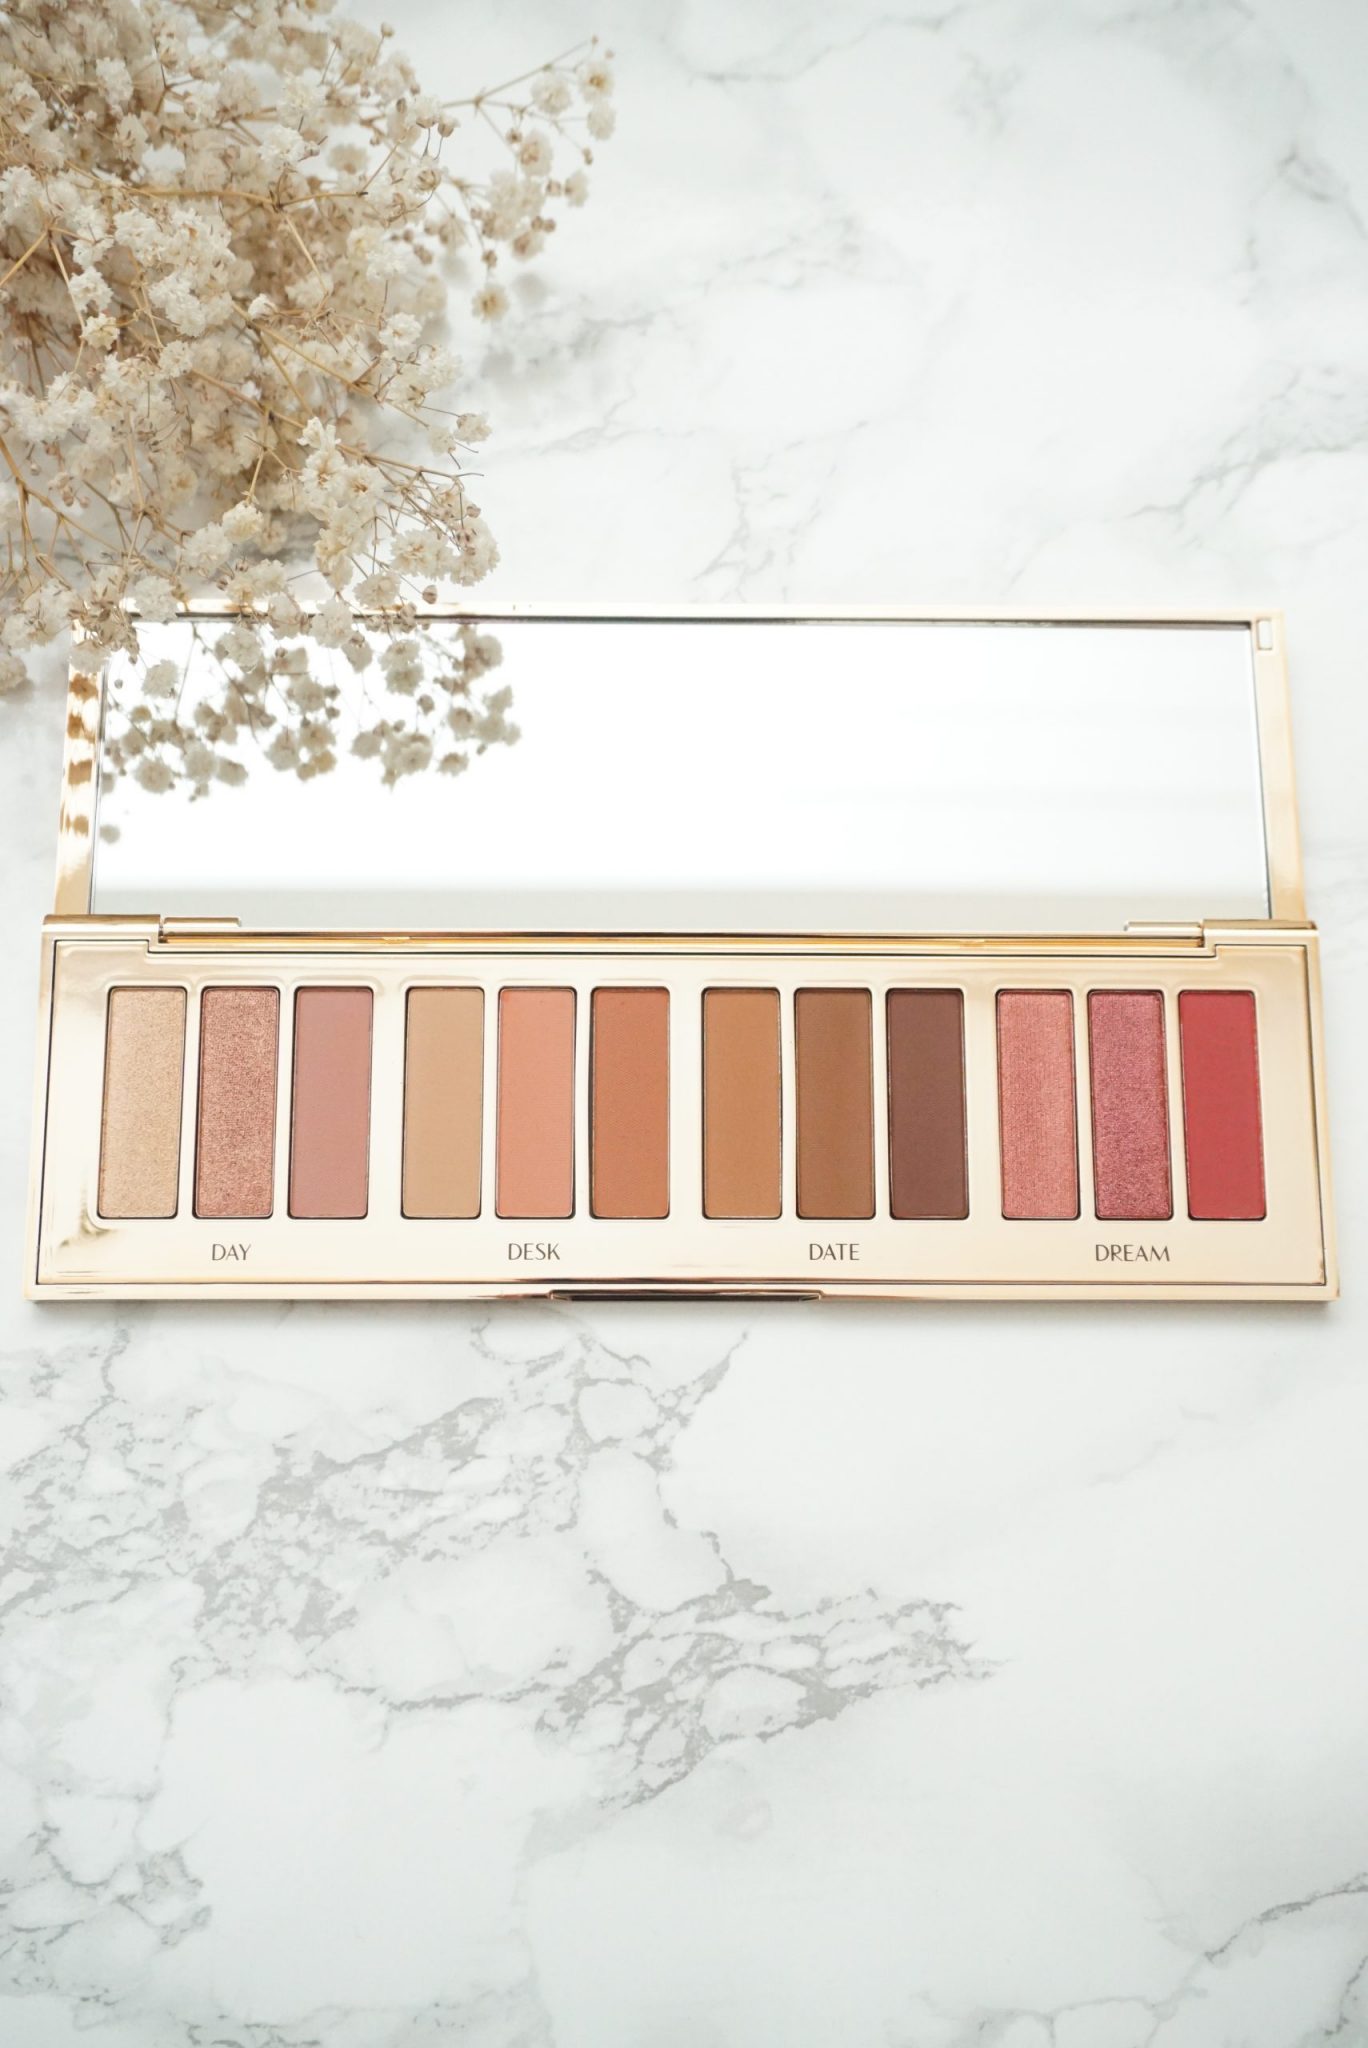 LUXURIOUS CHARLOTTE TILBURY PILLOW TALK EYESHADOW PALETTE REVIEW & SWATCHES